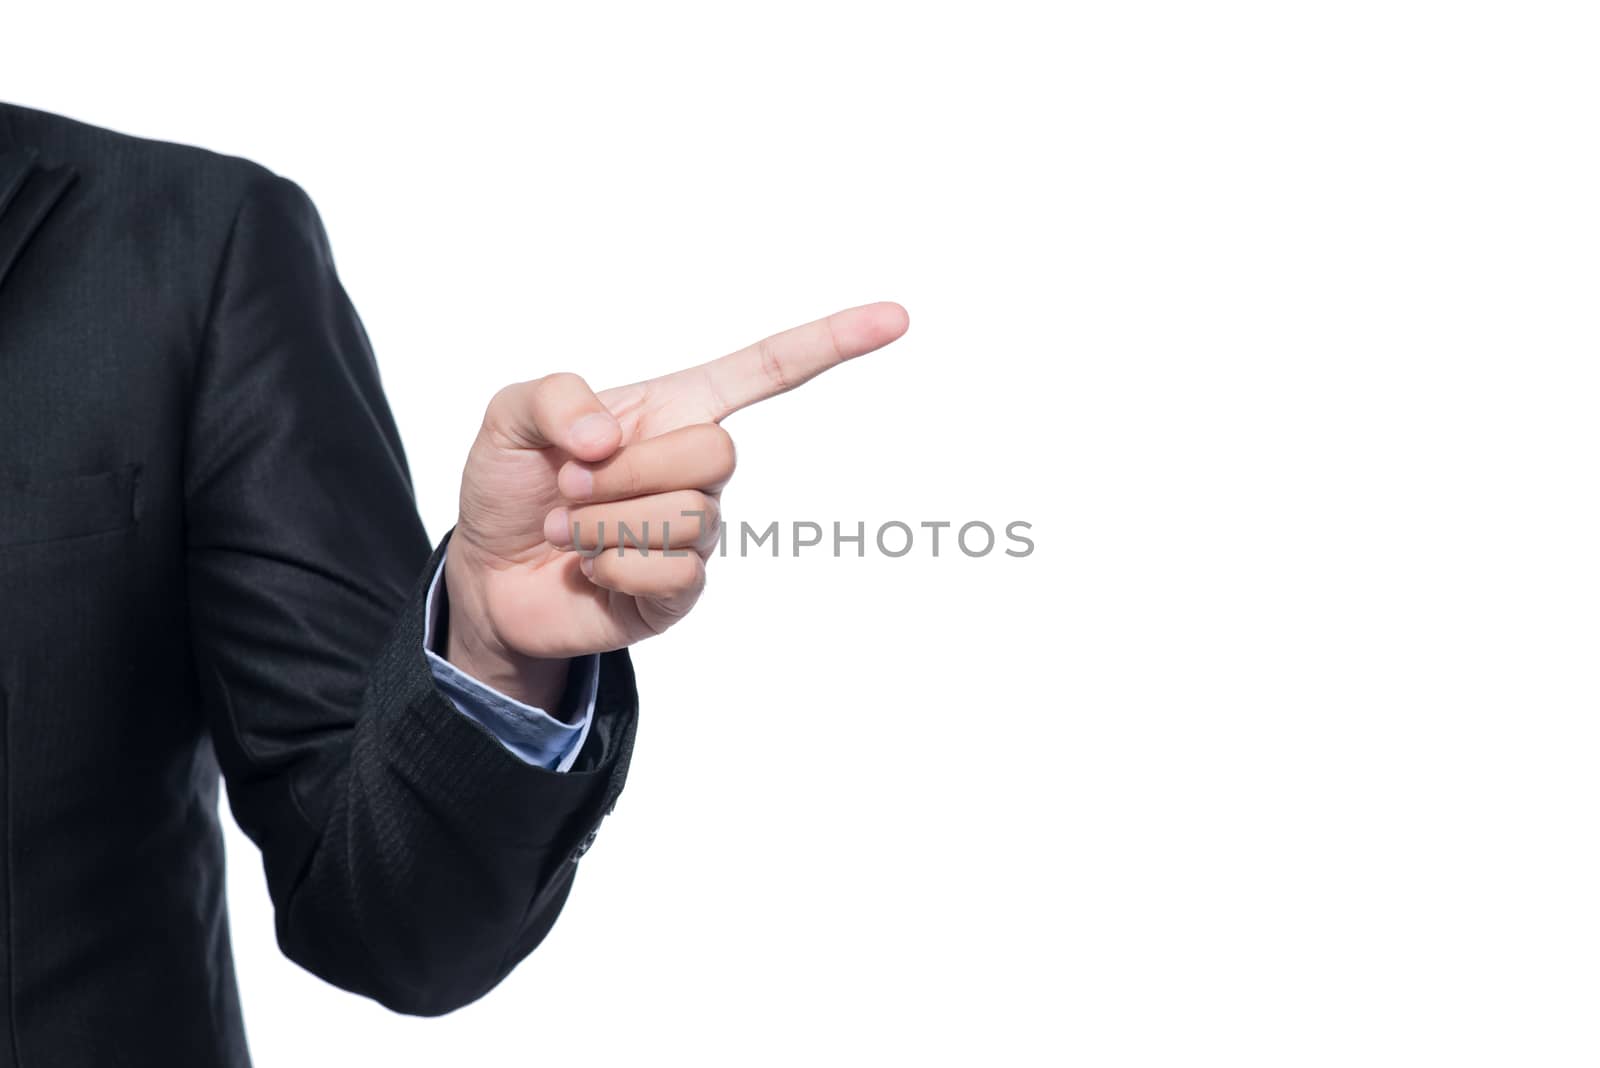 The gesture of a hand pointing on white background, isolated